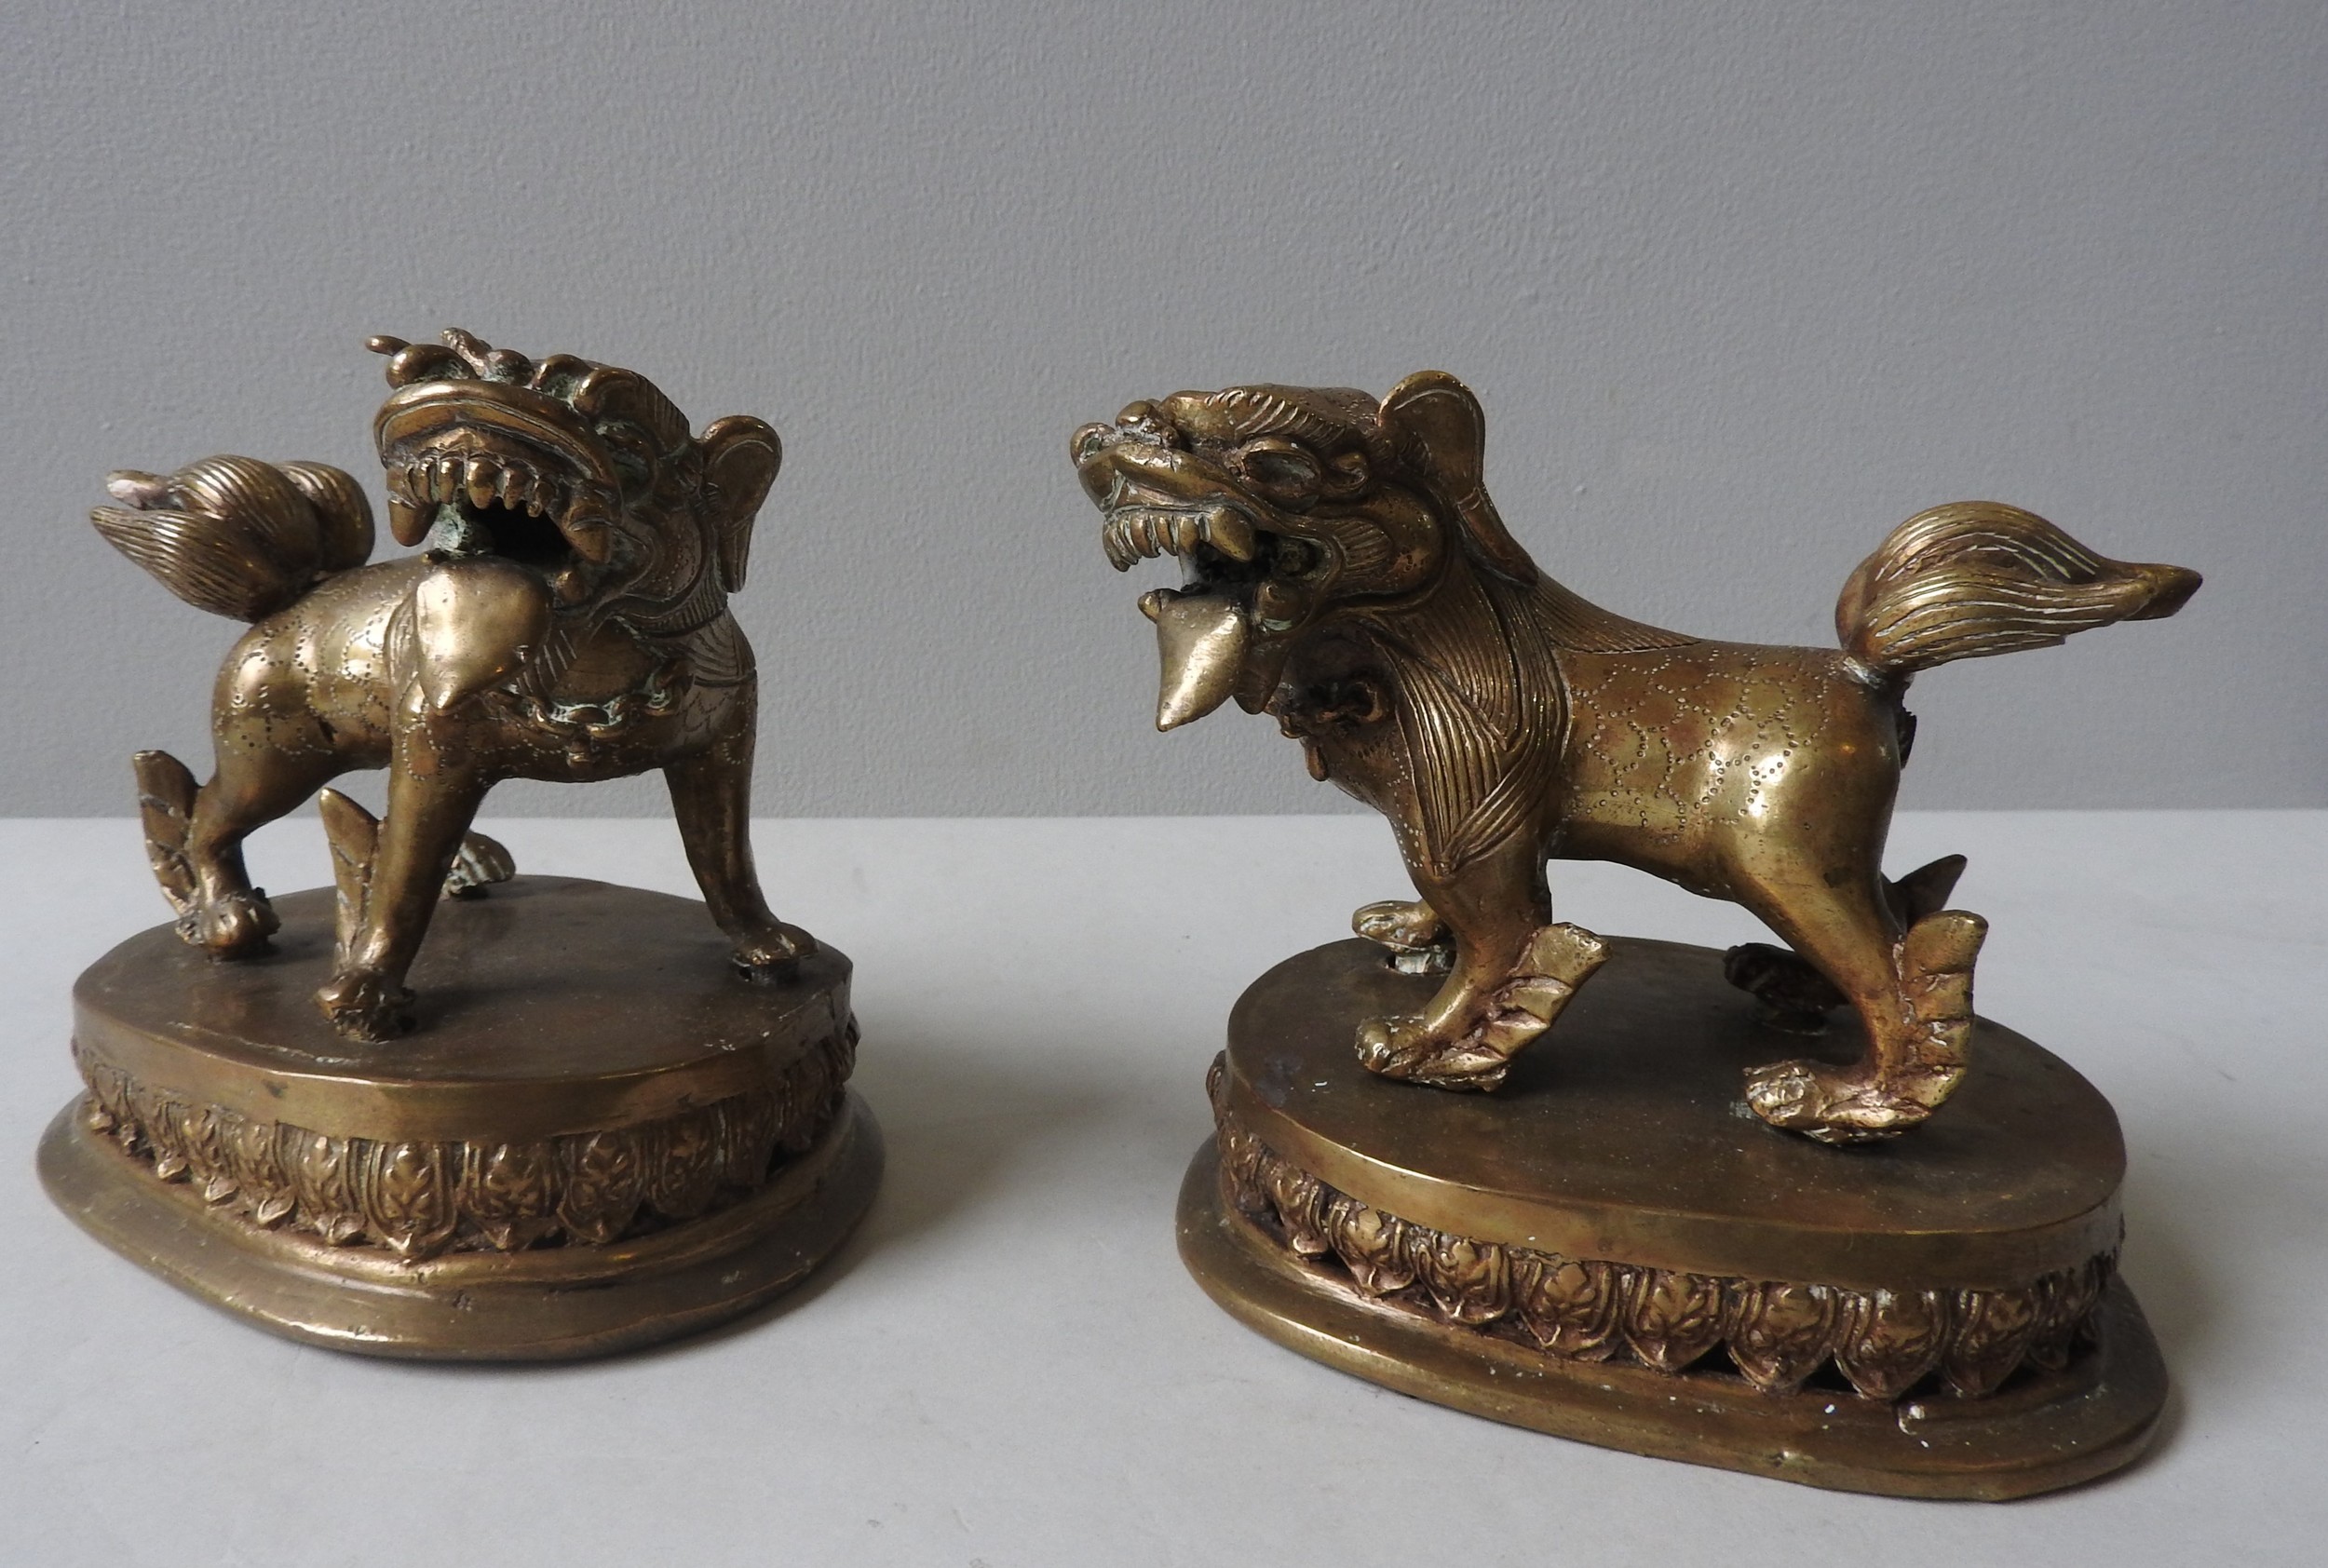 A PAIR OF LAQUERED BRASS CHINESE LIONS, QING DYNASTY, standing foursquare on lotus bases 14 cm high - Image 2 of 4